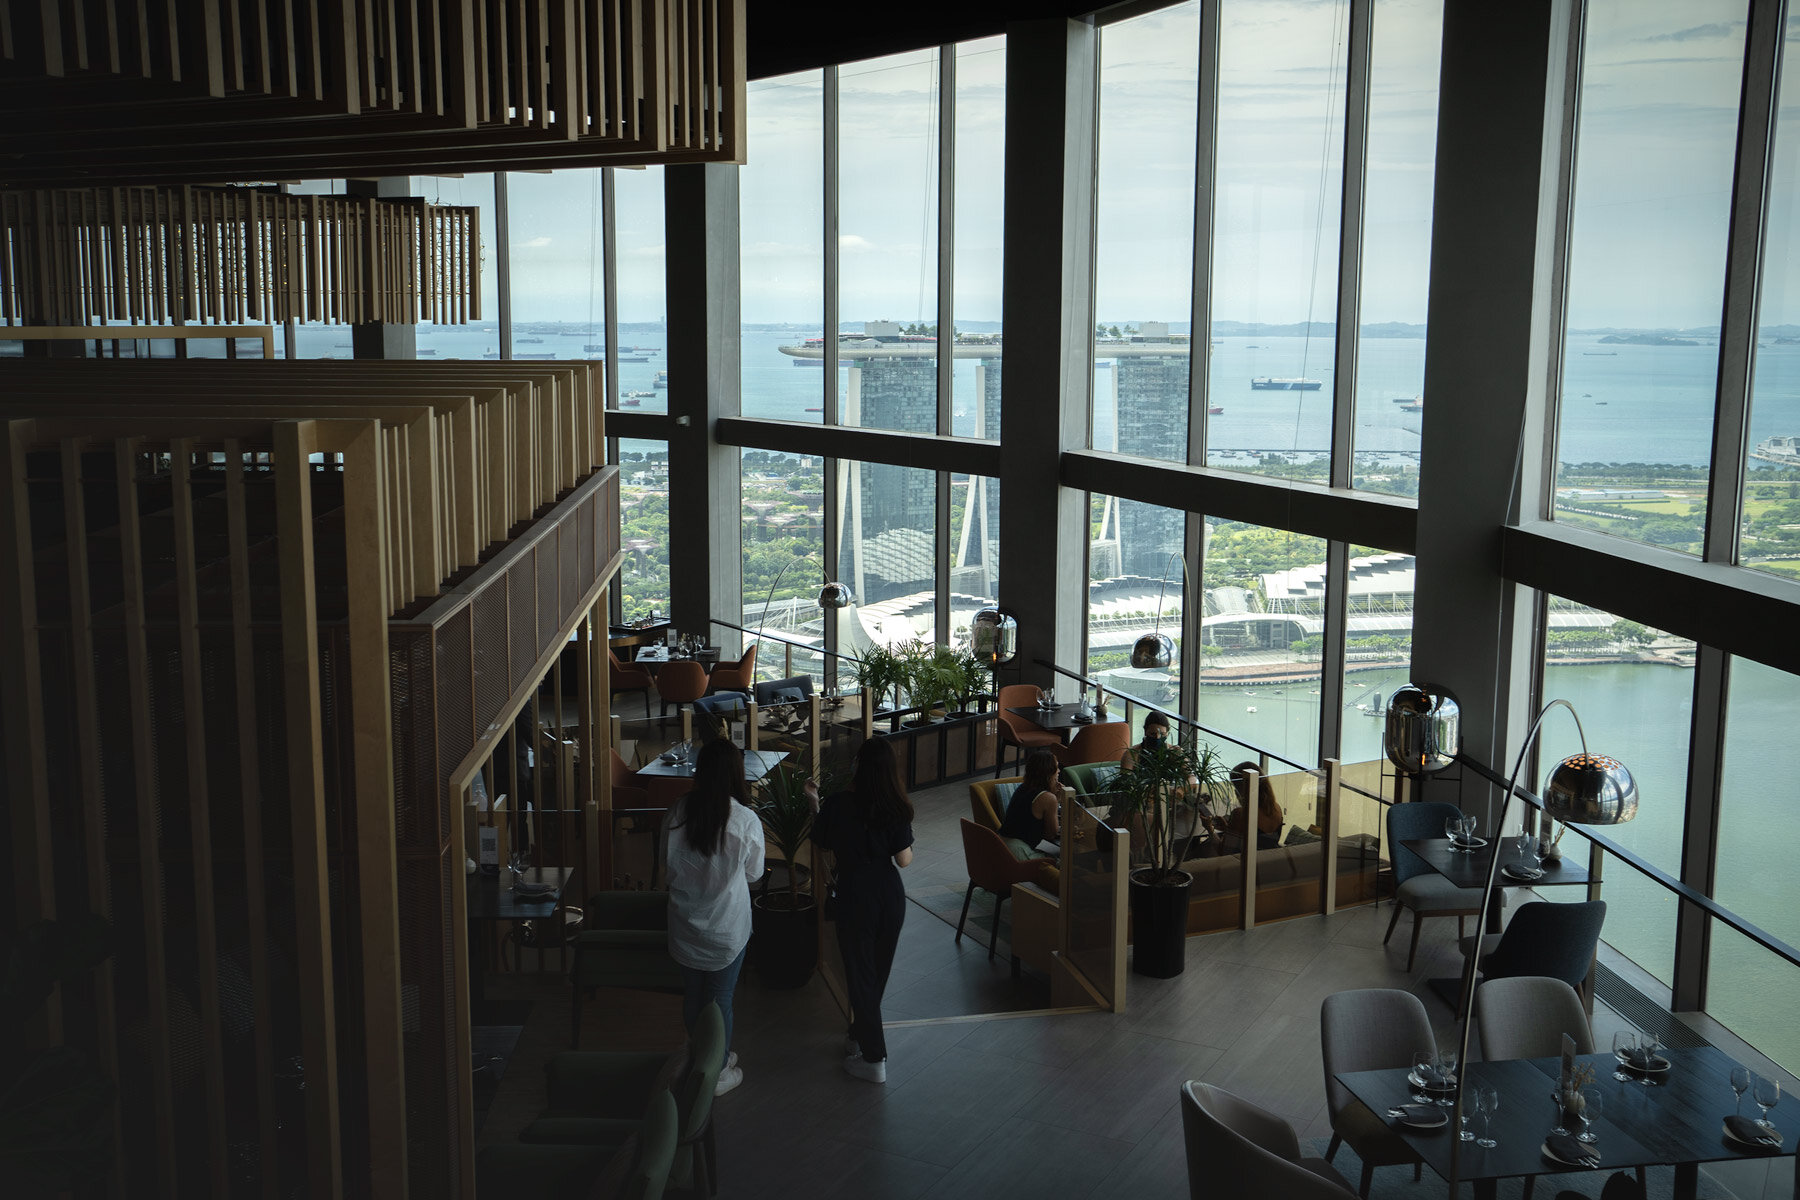 Located on the 70th floor of the Swissôtel The Stamford, Skai Restaurant offers spectacular views over the city